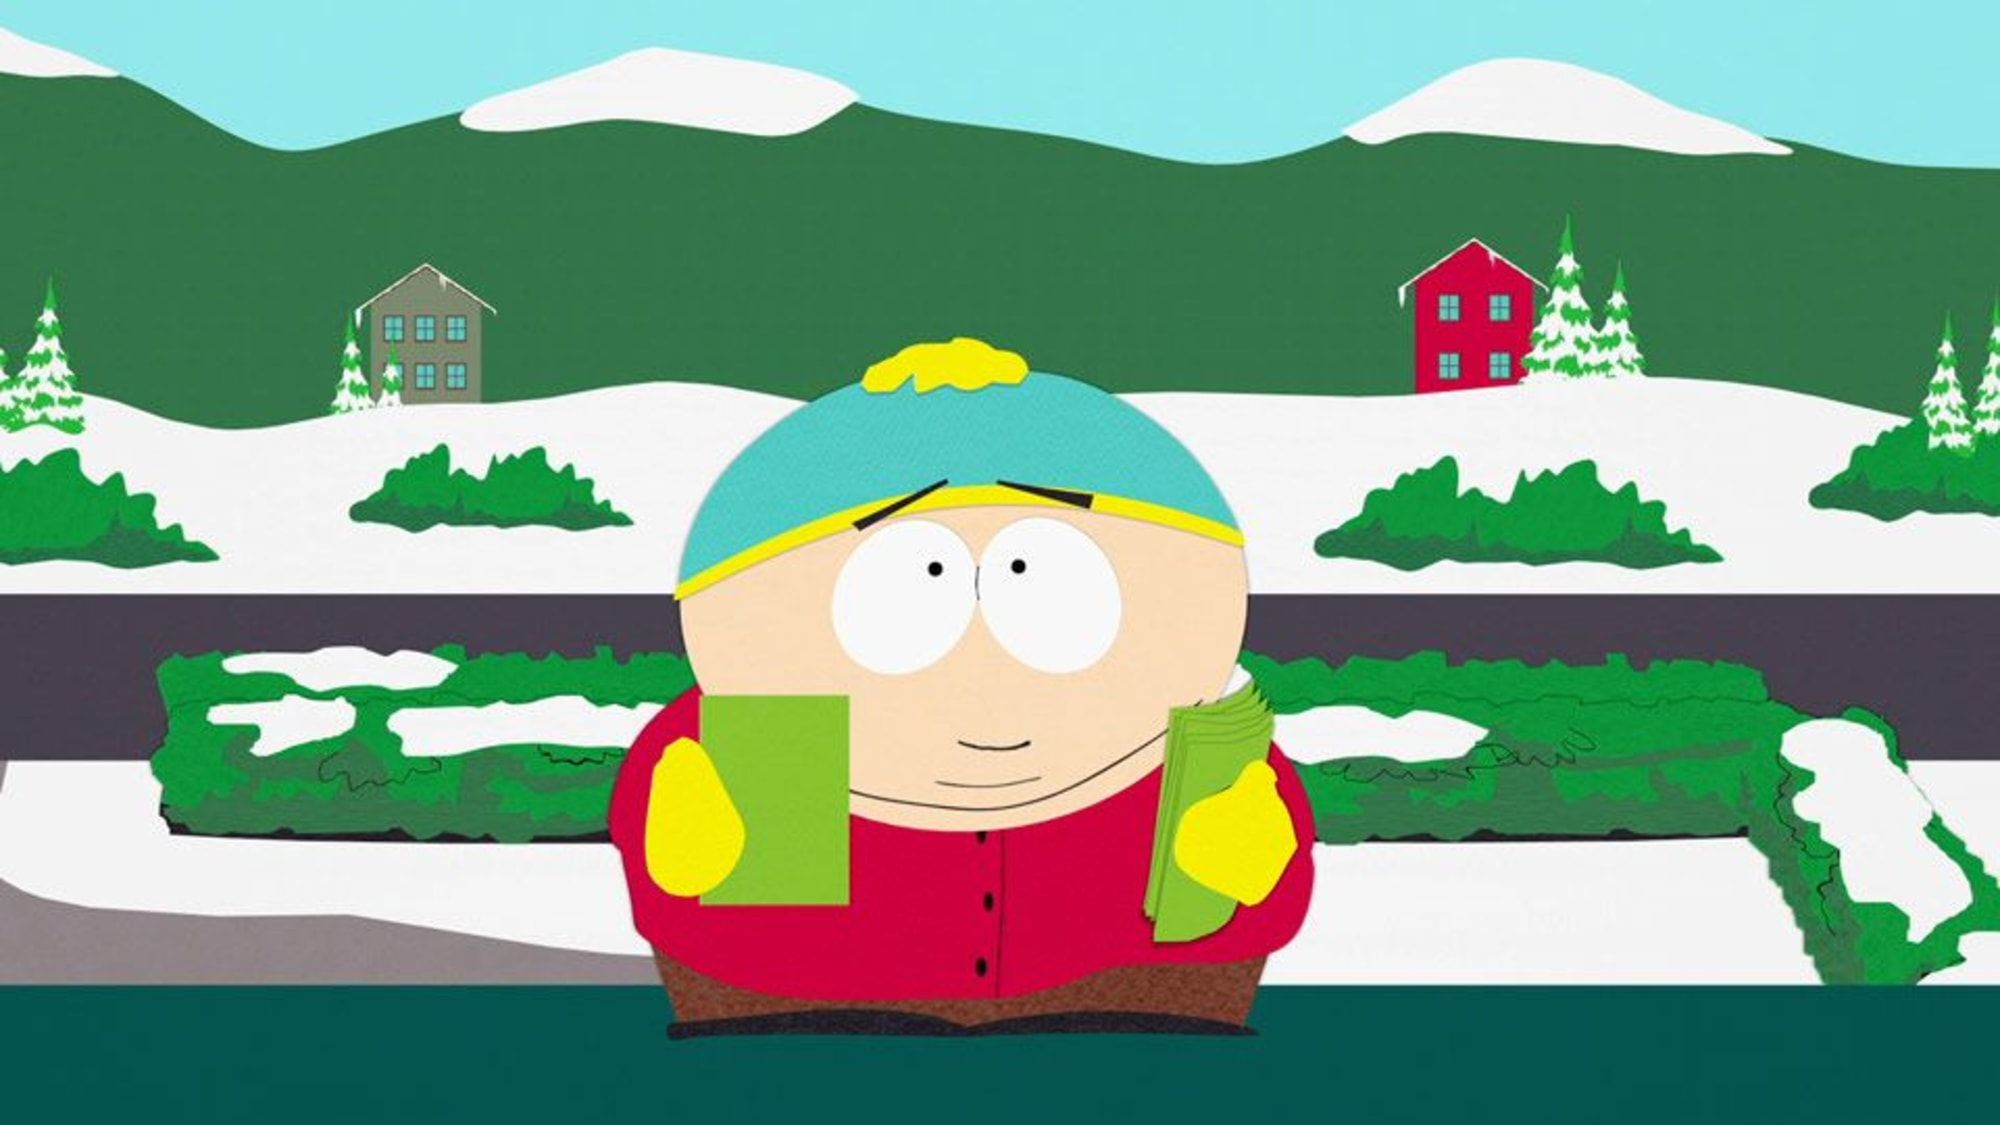 South Park Movie 'The Streaming Wars' to Premiere in June on